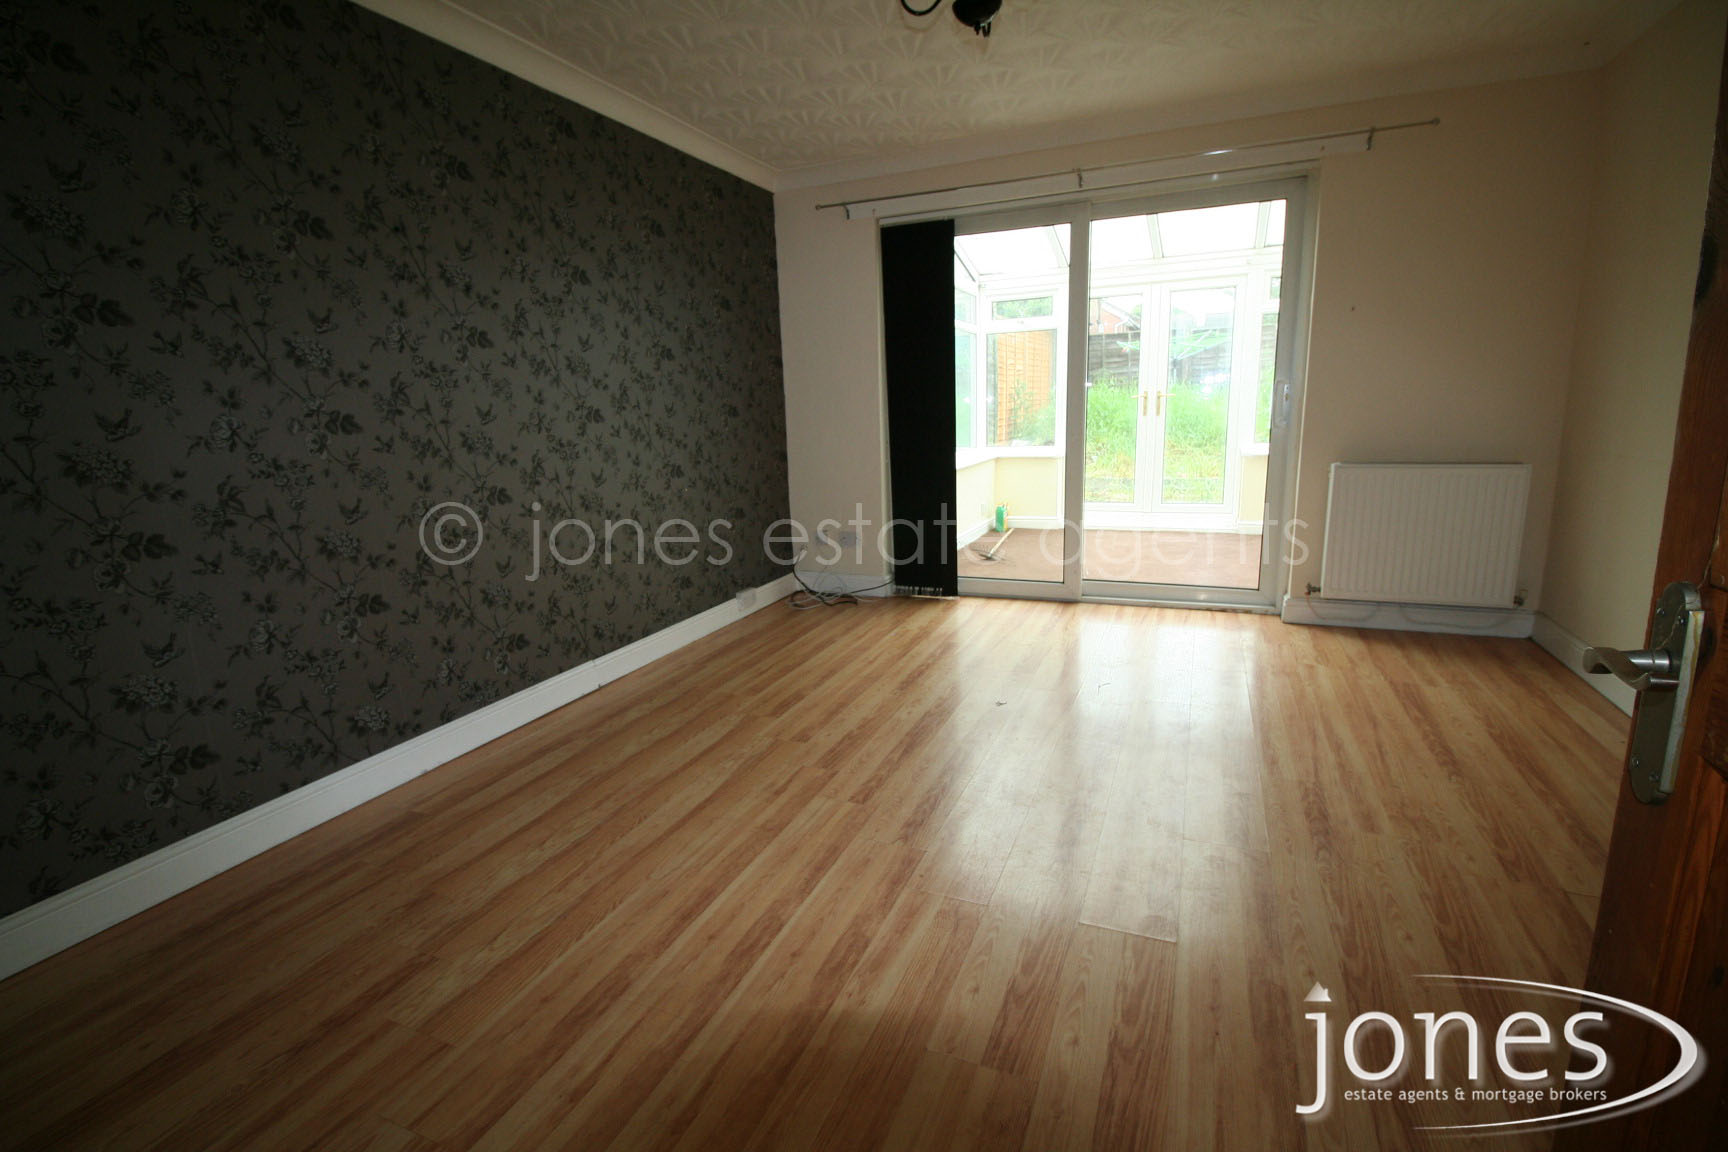 Home for Sale Let - Photo 02 Cuthbert Close, Thornaby, on Tees, TS17 6PJ